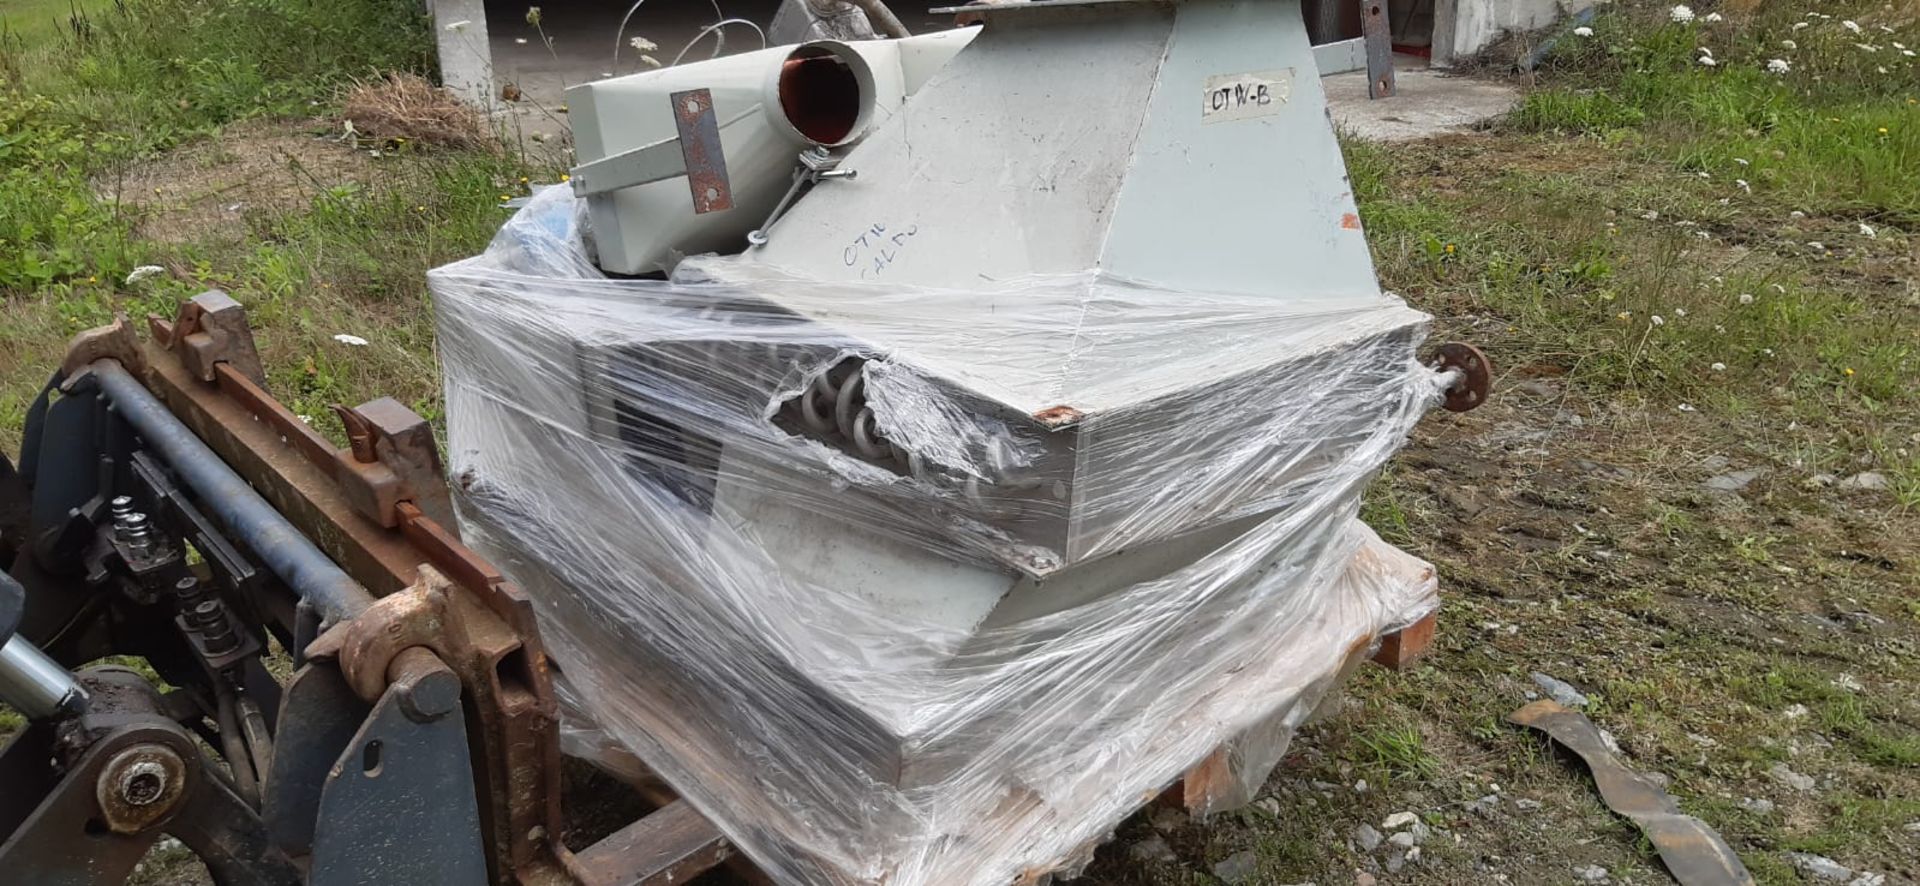 Bed Dryer - Buhler OTW 150 fluid bed dryer/cooler, new 1998 but never used. It can be used to dry or - Bild 9 aus 11